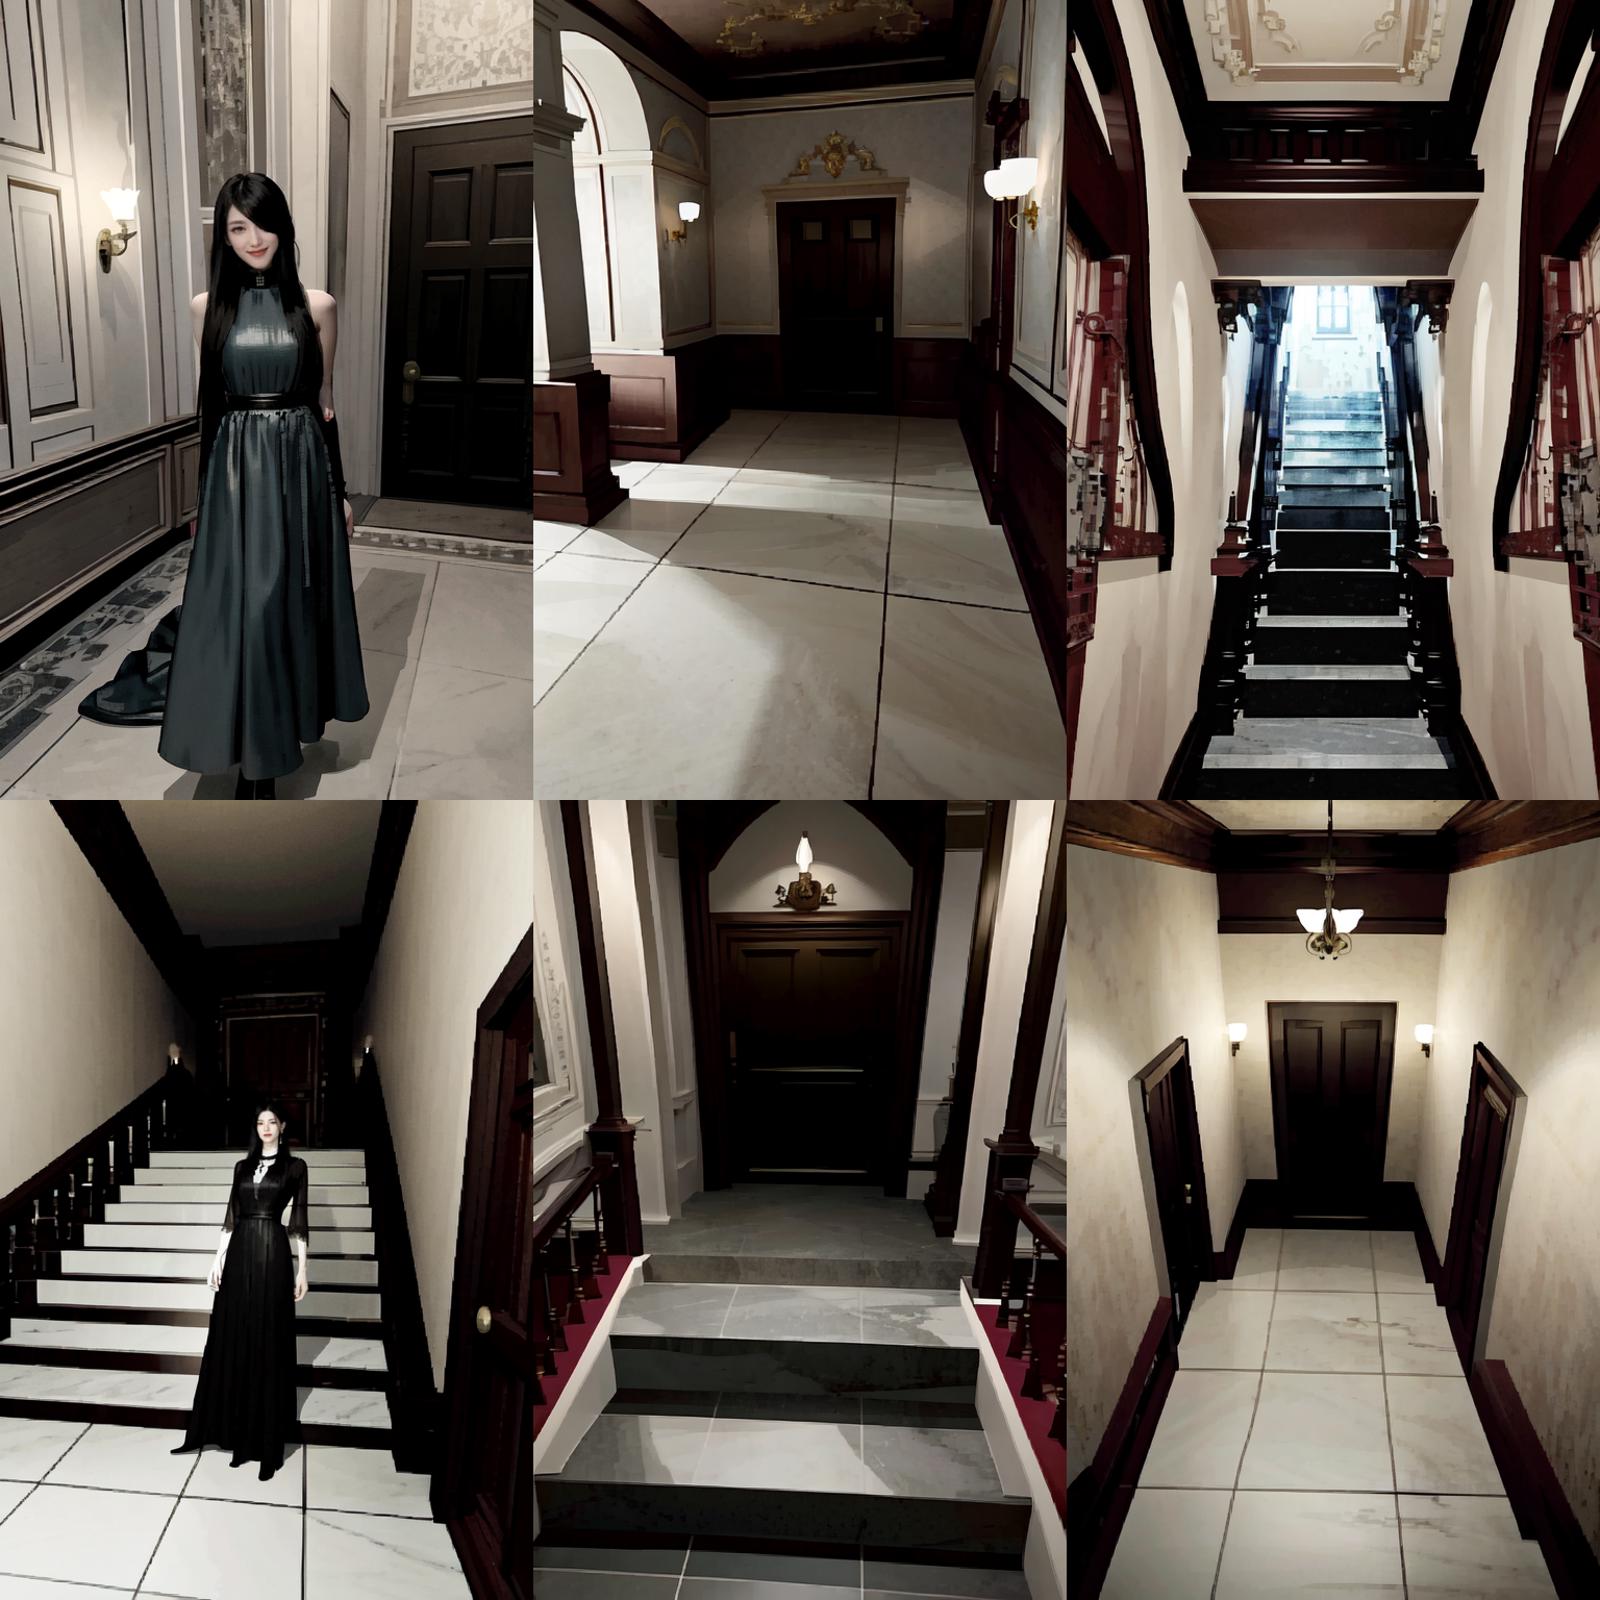 Resident Evil (1996) Mansion Background image by bluelovers